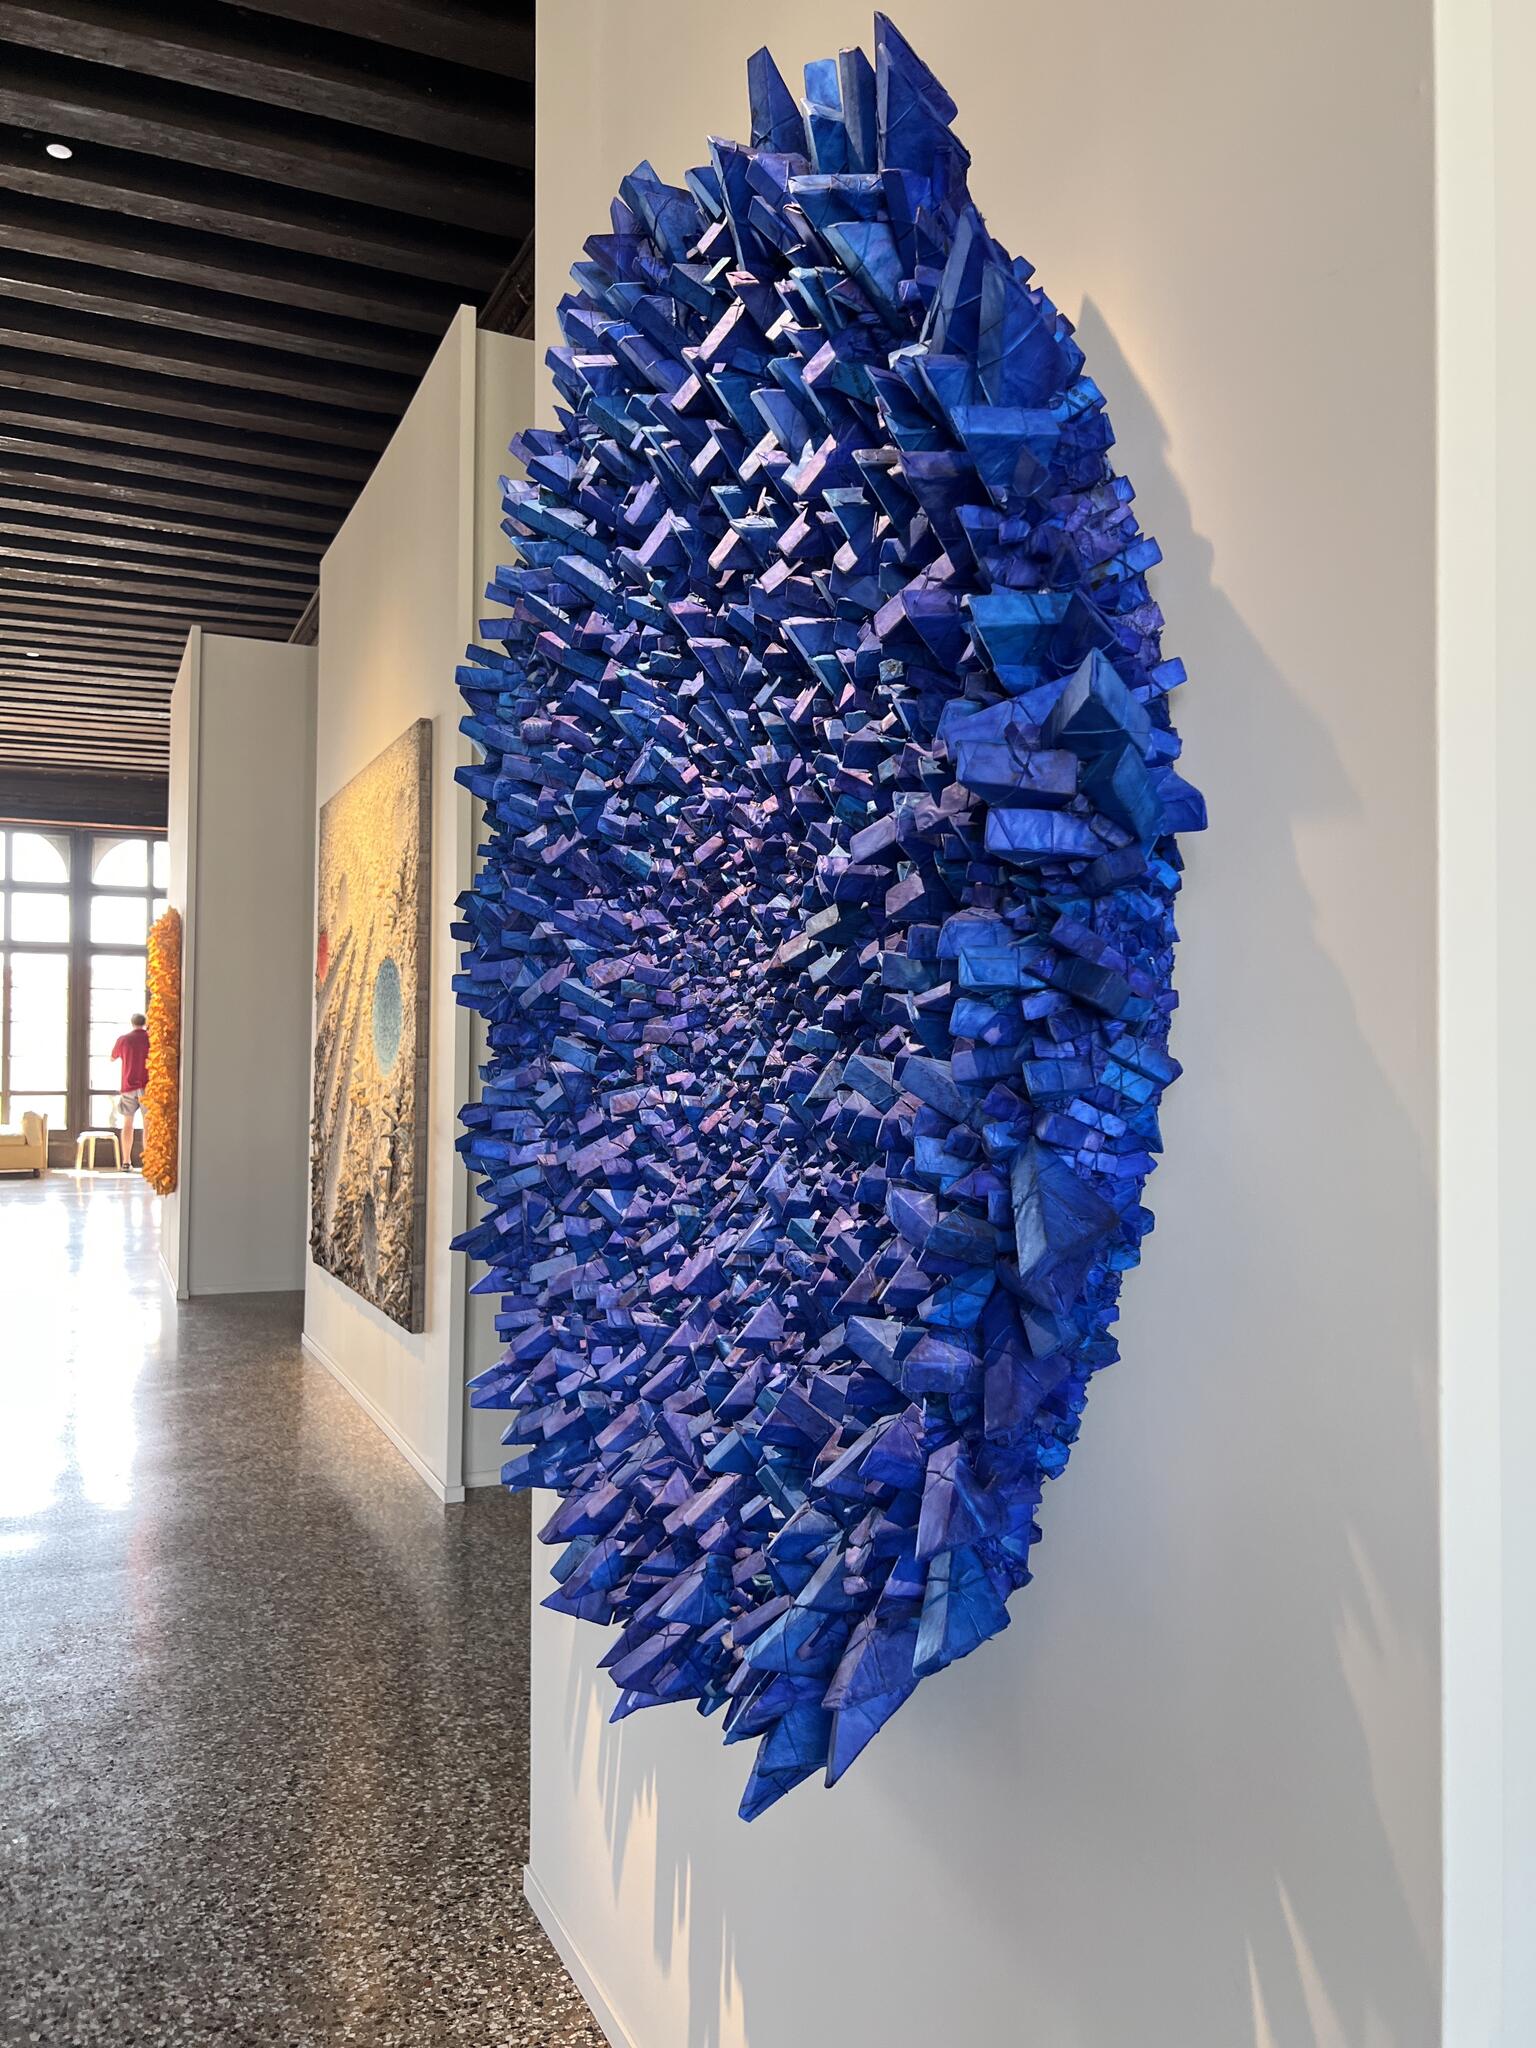 A sculpture from Chun Kwang Young's "Time Reimagined" at Palazzo Contarini Polignac, Venice, 2022. Photo courtesy of Elise Masotti. 